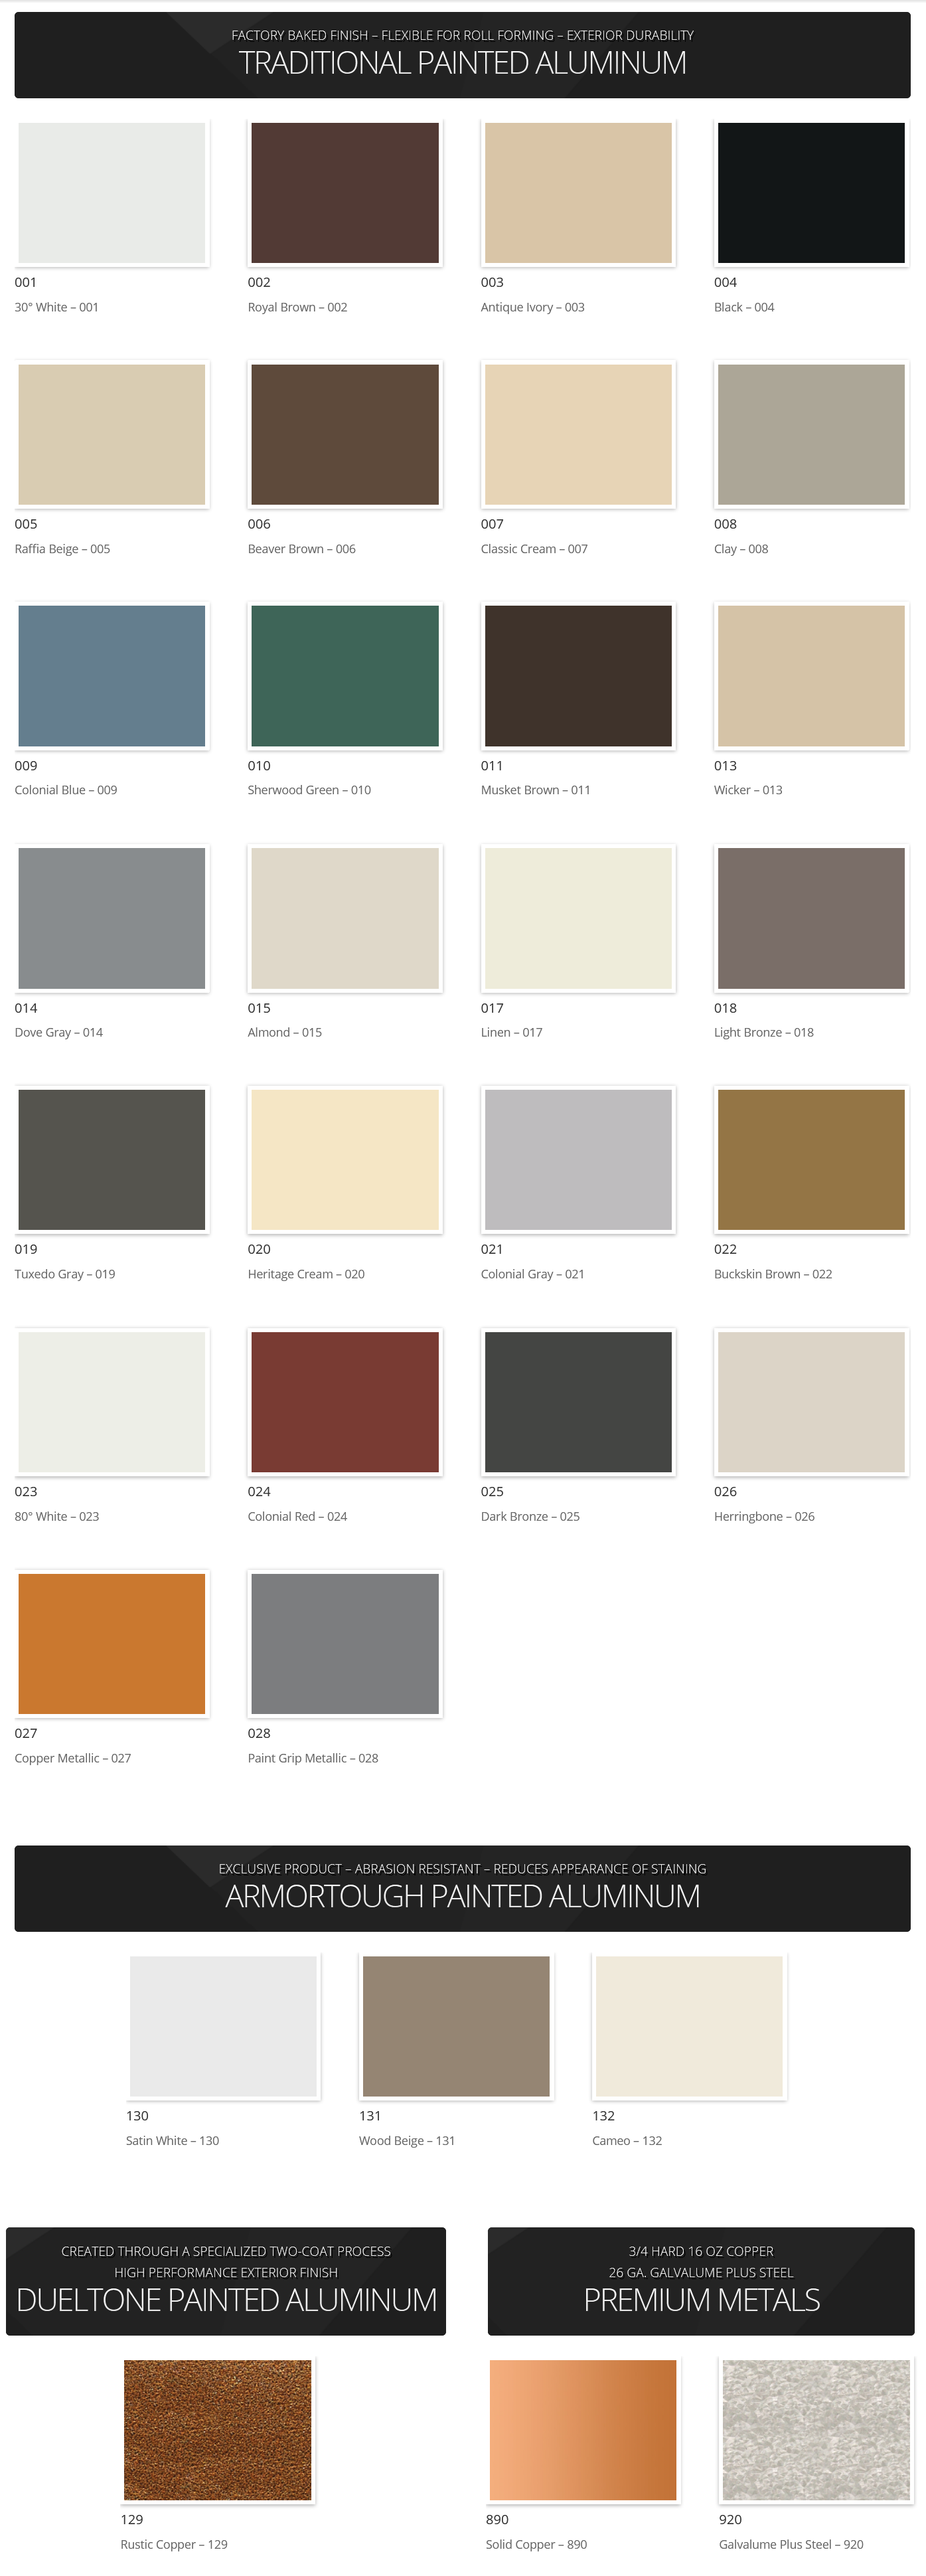 abq gutters aluminum color swatches